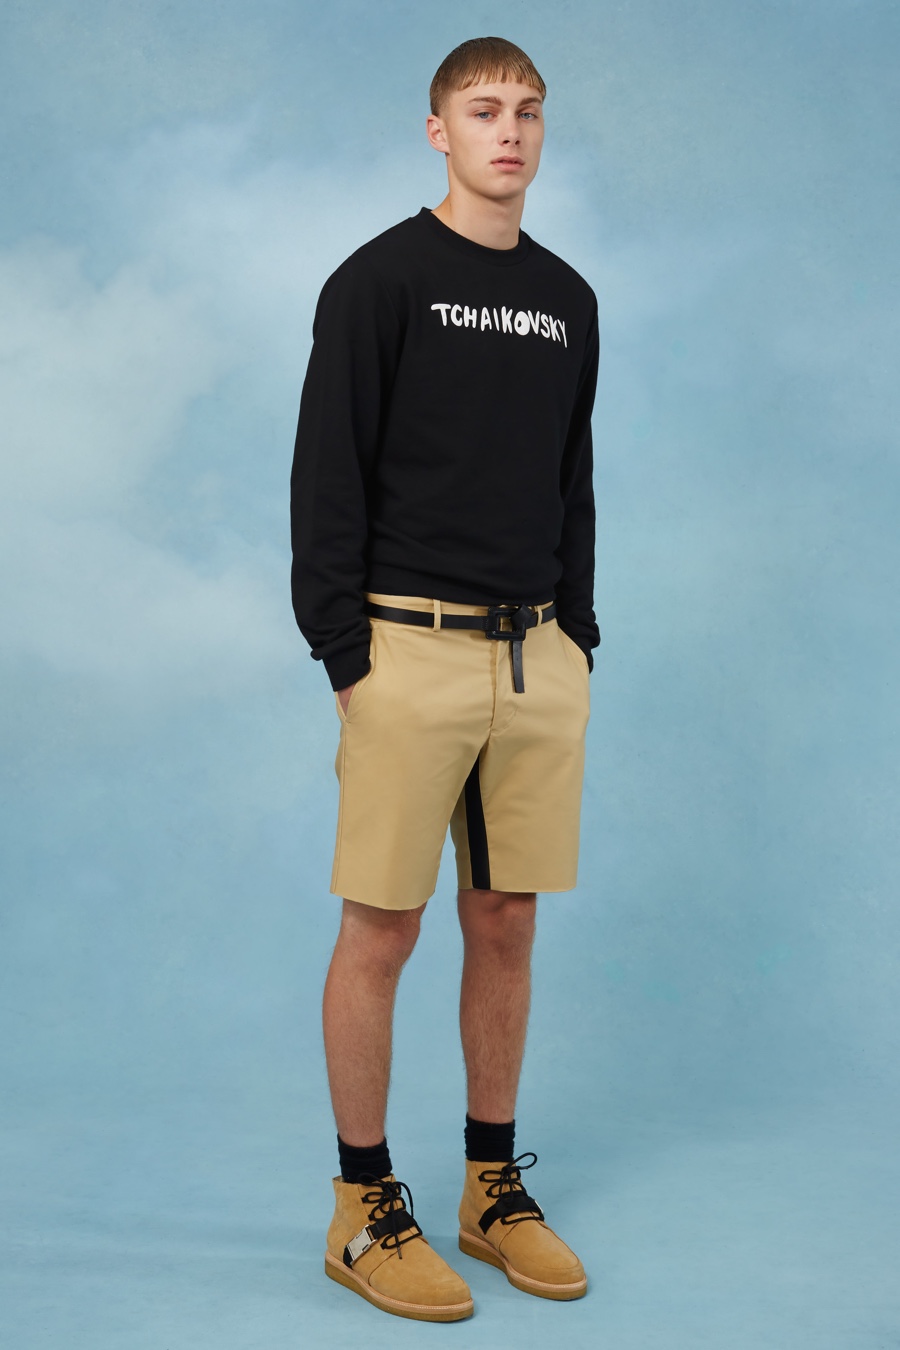 Opening Ceremony Spring/Summer 2016 Menswear Collection is a Teenage Dream